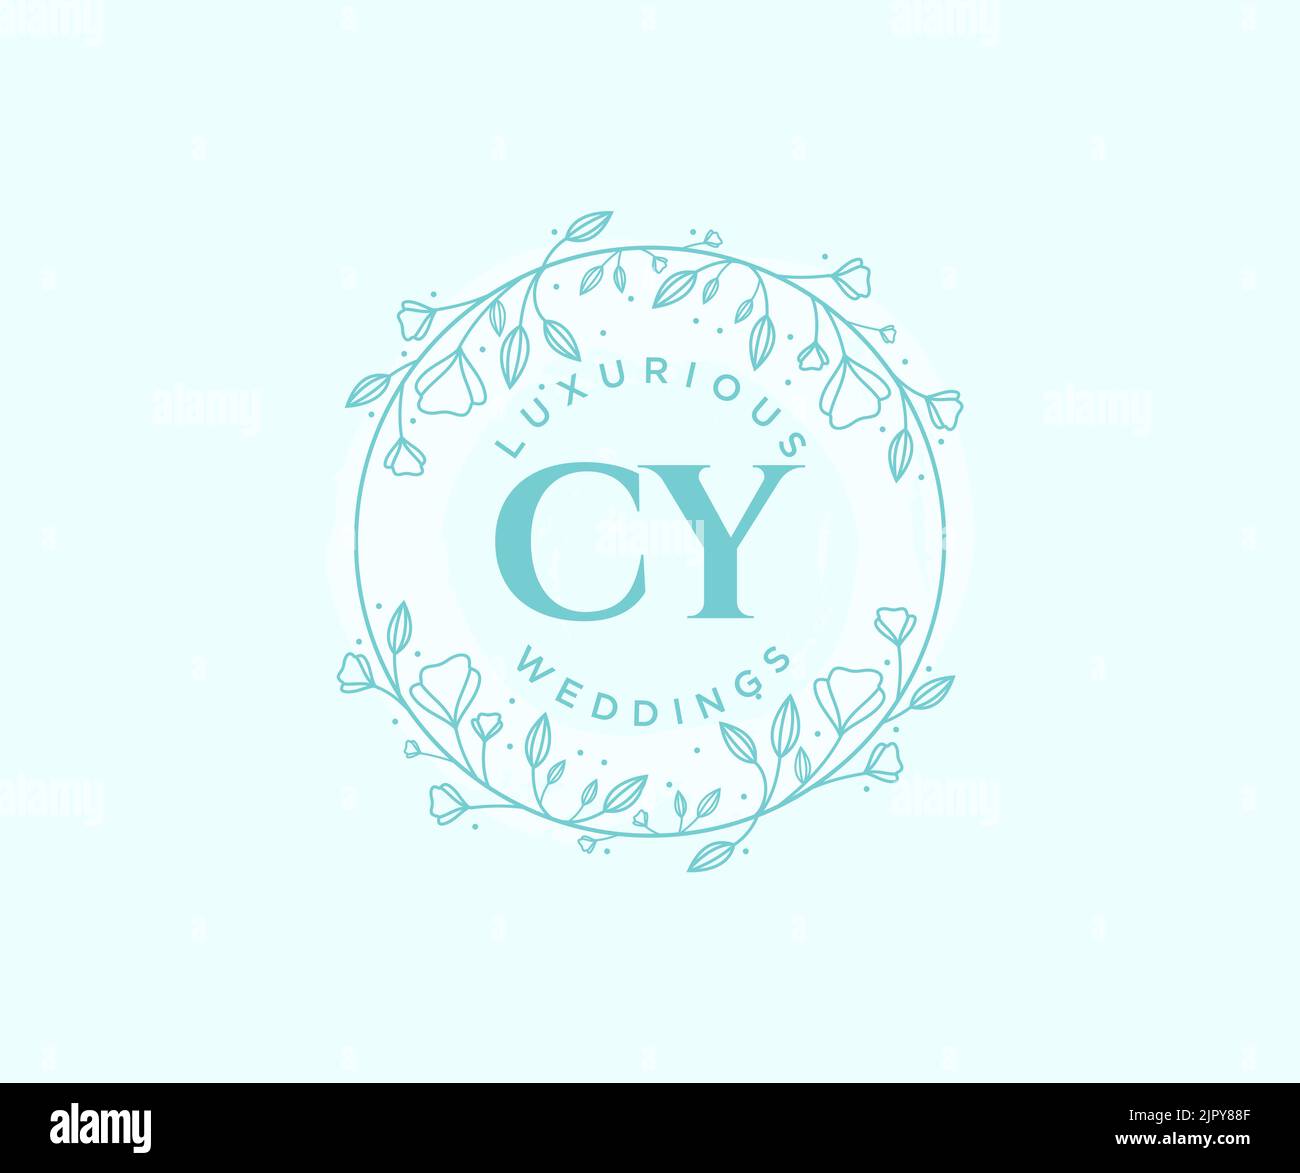 CY Initials letter Wedding monogram logos template, hand drawn modern minimalistic and floral templates for Invitation cards, Save the Date, elegant Stock Vector